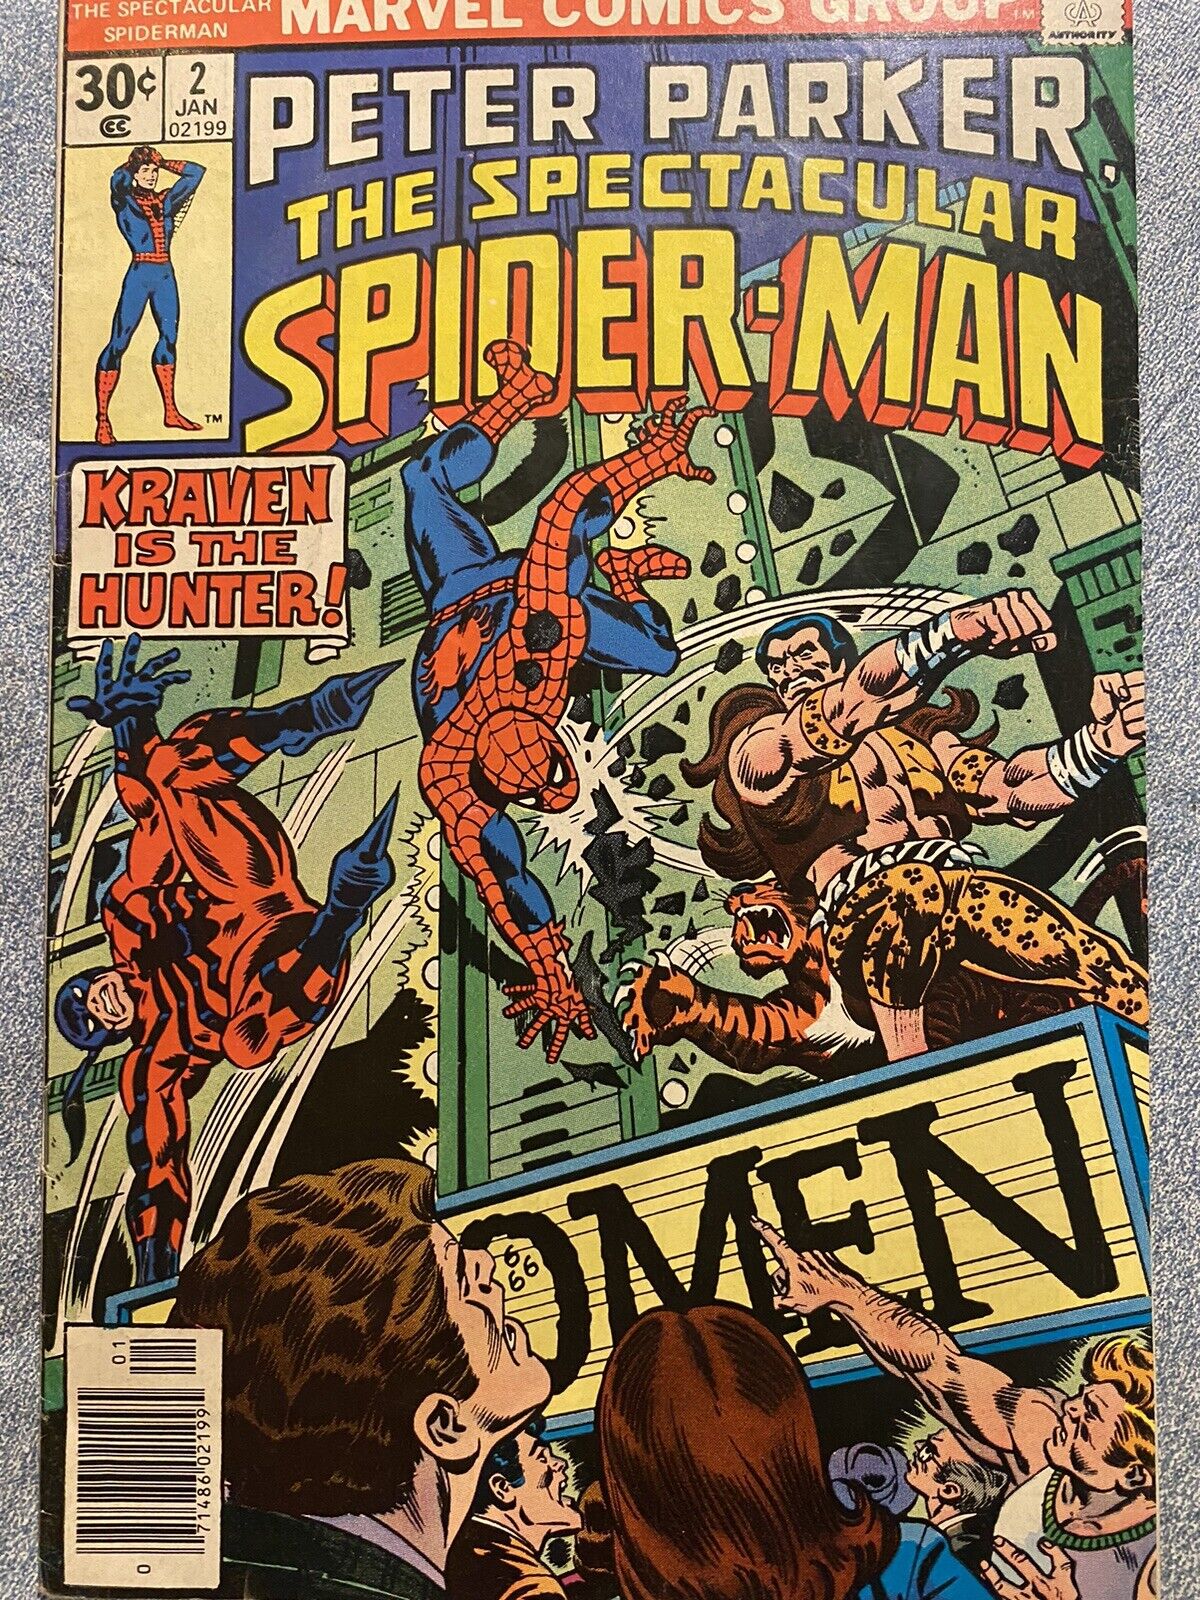 Peter Parker The Spectacular Spider-Man #2 (Marvel Comics January 1977)